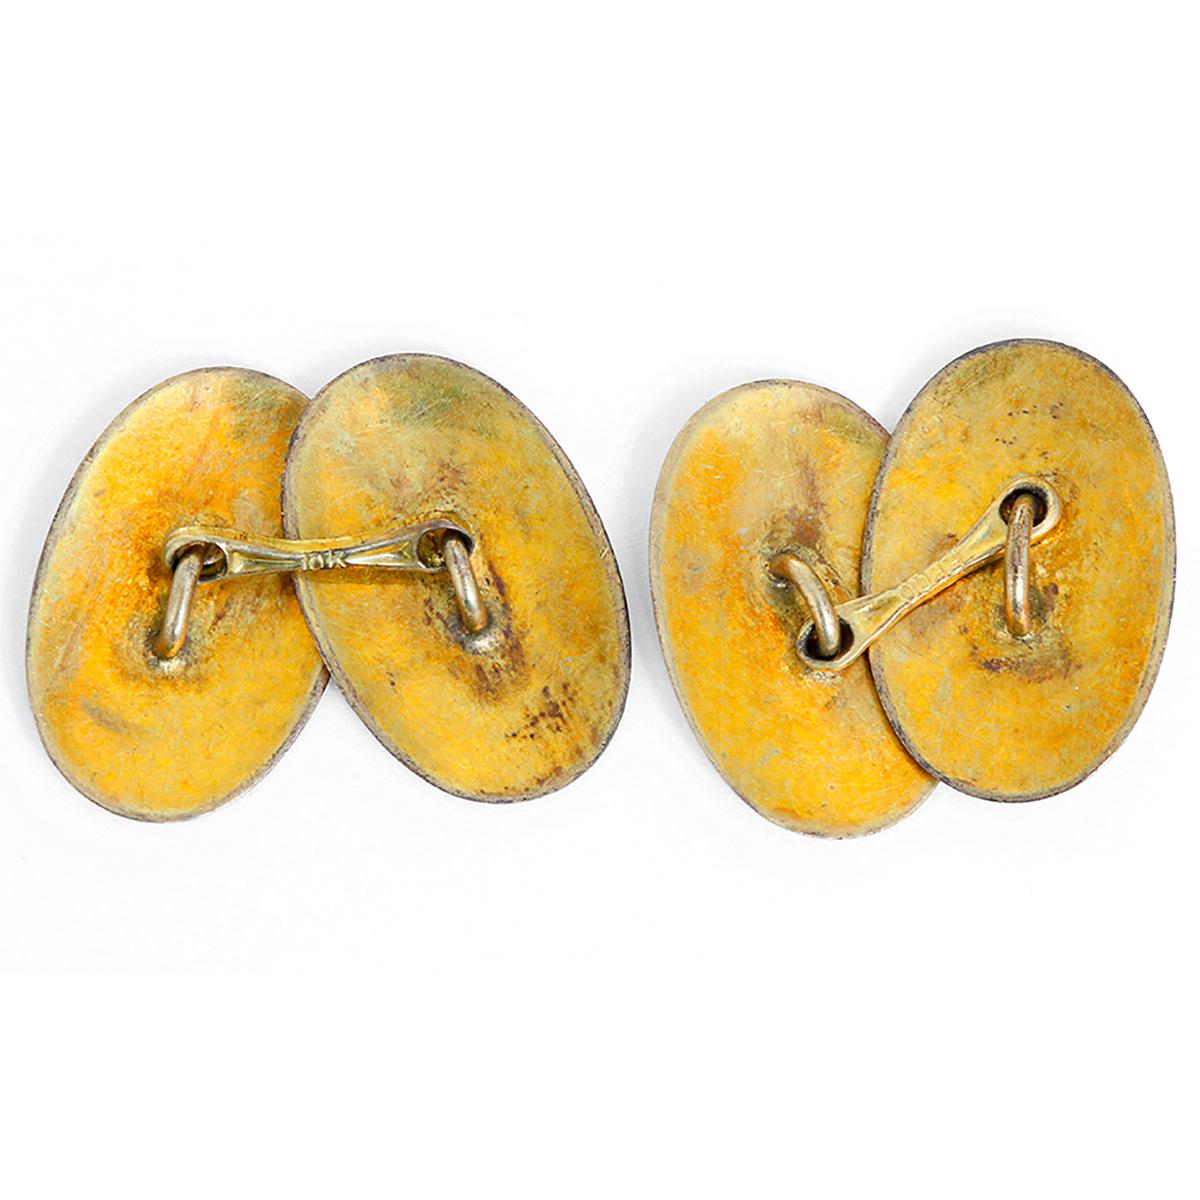 Vintage 10k Yellow Gold Oval Cufflinks - These vintage cufflinks are 10k yellow gold and measure apx. 11/16-inch in length and 7/16-inch in width. Total weight is 3.6 grams.